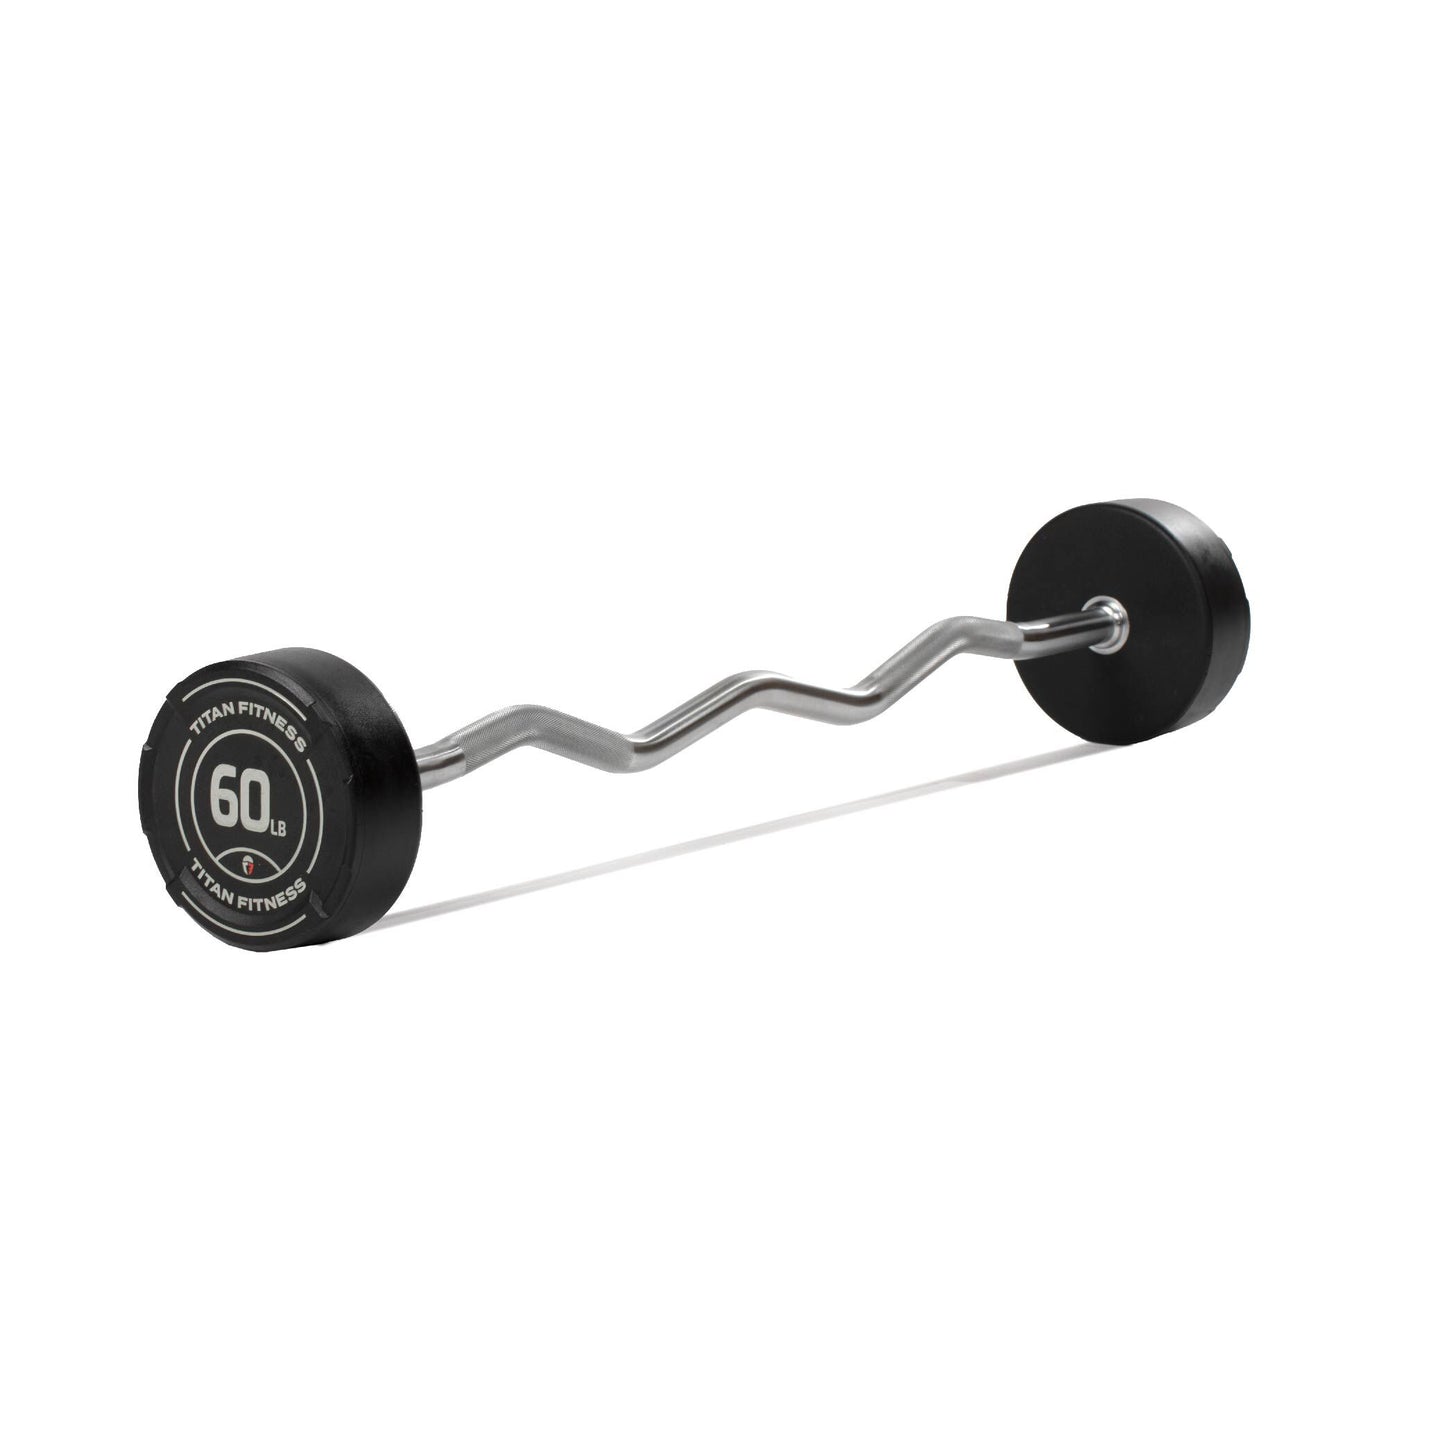 60 LB EZ Curl Fixed Rubber Barbell - view 1